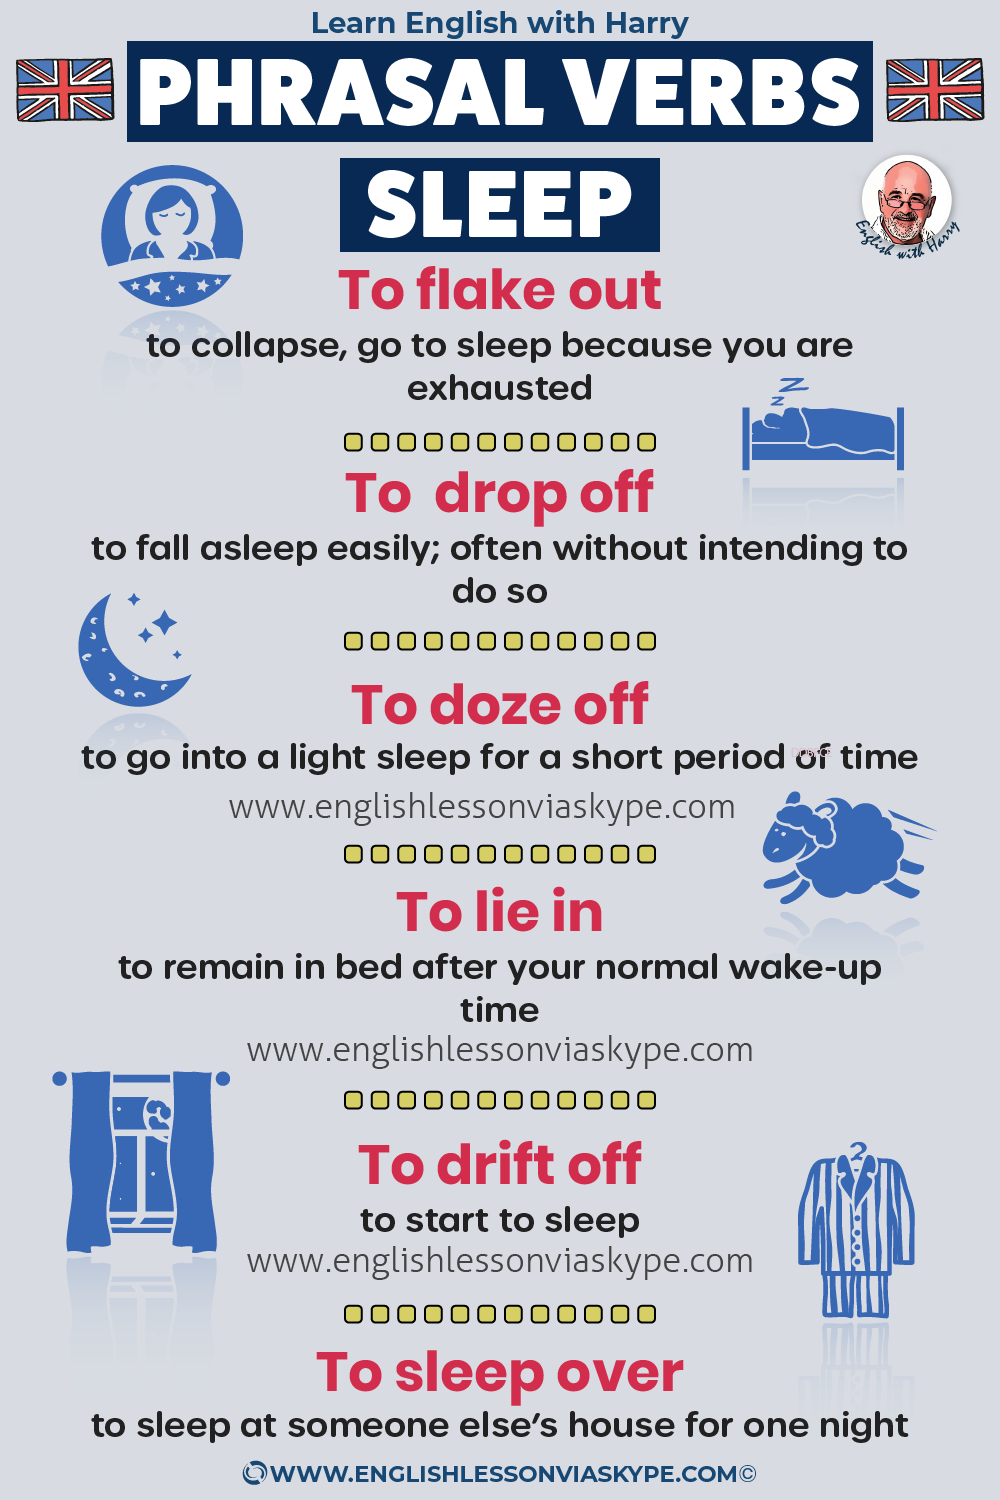 Phrasal verbs connected with sleep. Difference between drop off and doze off. Advanced English lessons on Zoom and Skype at www.englishlessonviaskype.com #learnenglish #ingles